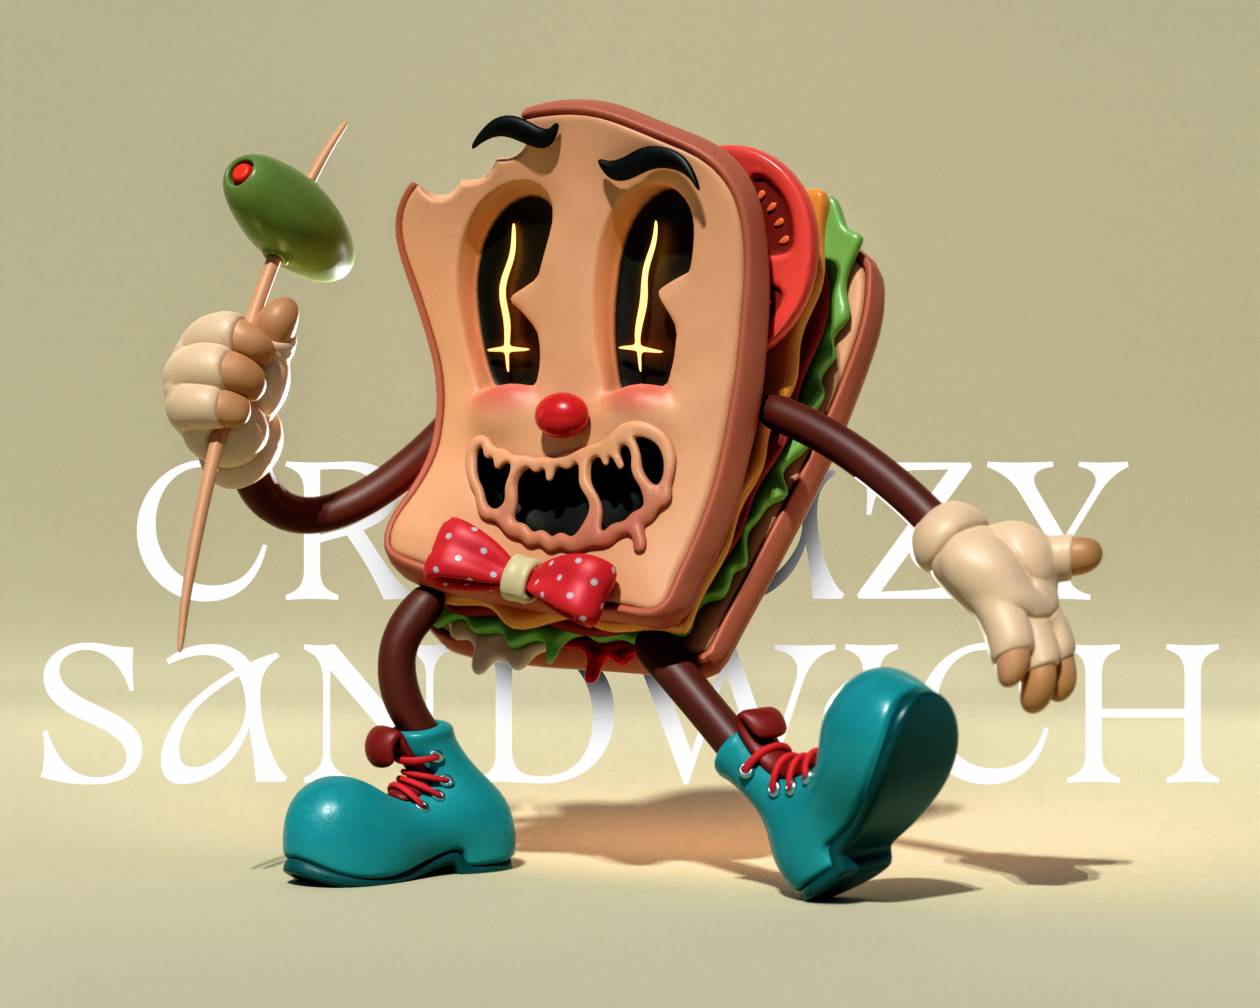 Cazy Sandwich - 3D Stylized Character inspired from Cuphead